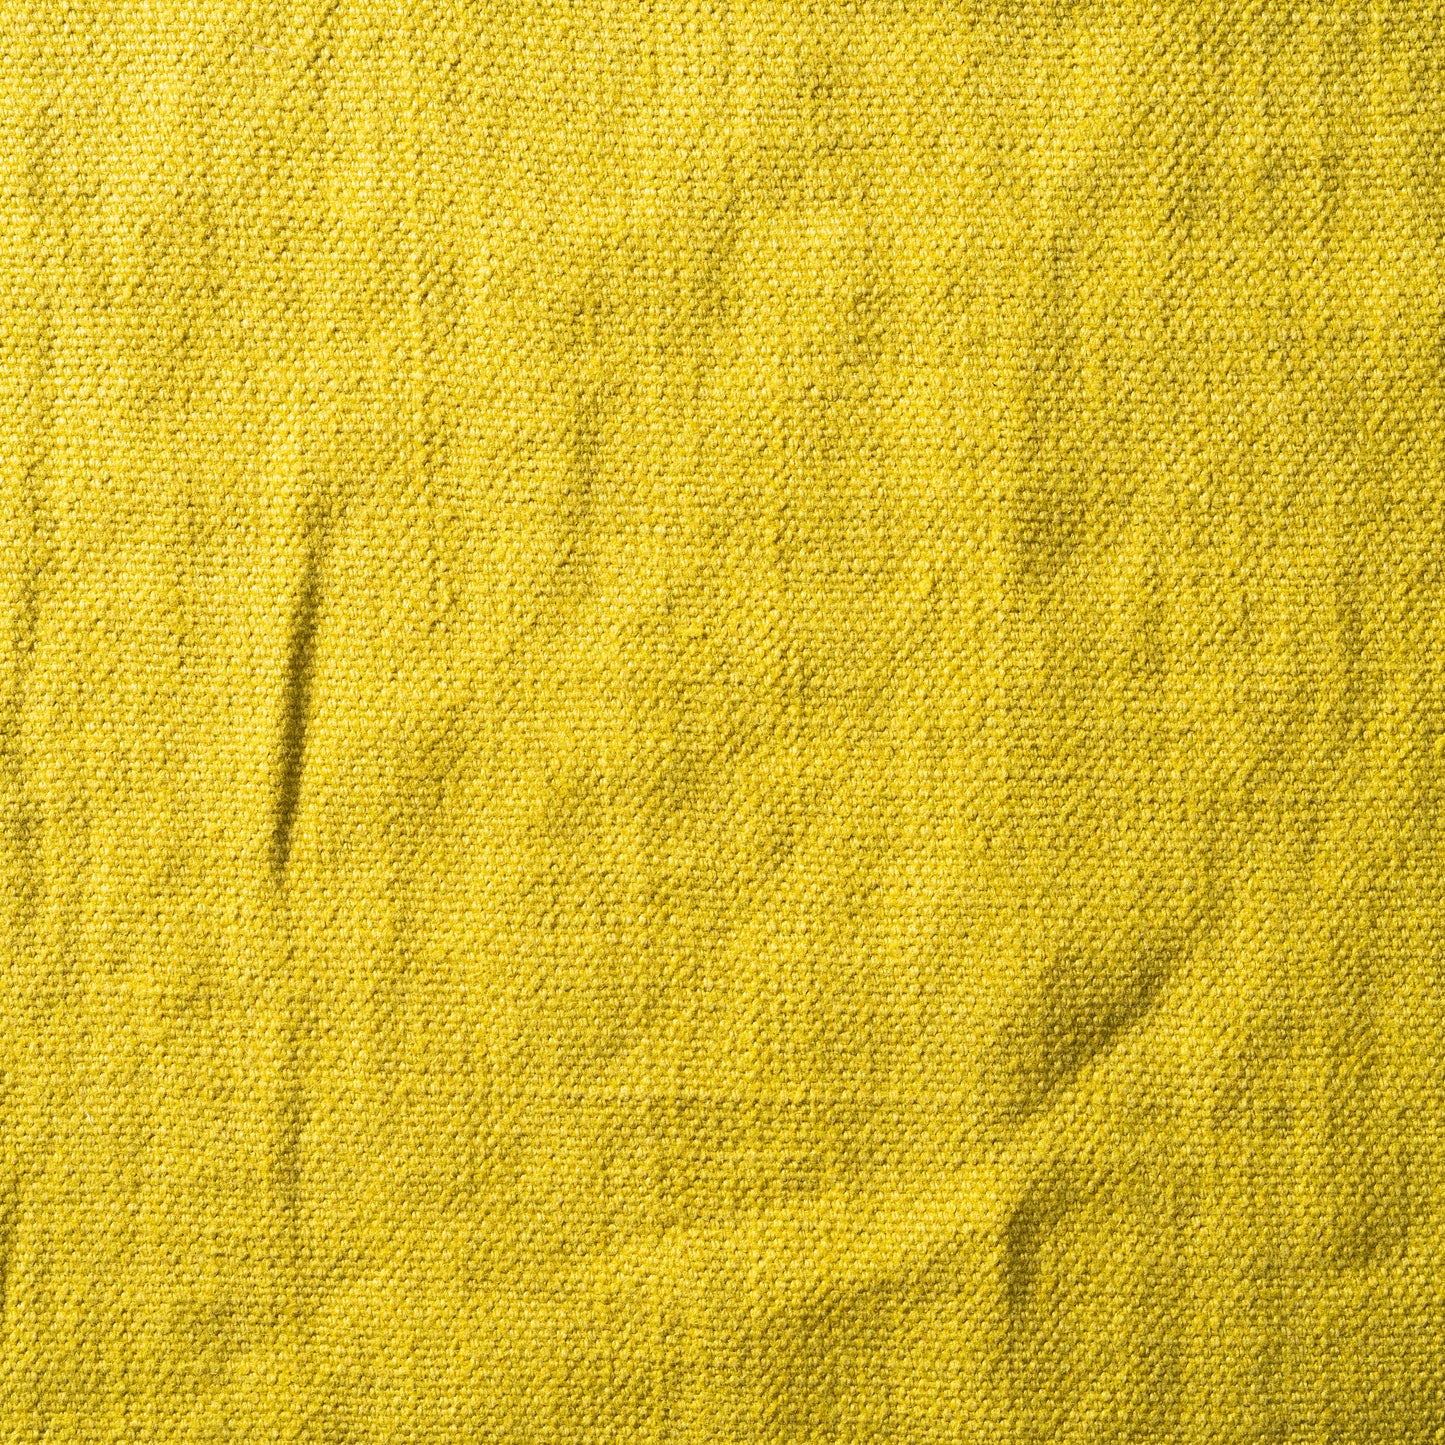 14.3 oz/sq yard 100% Upholstery/ Slipcover Weight Linen in Canary